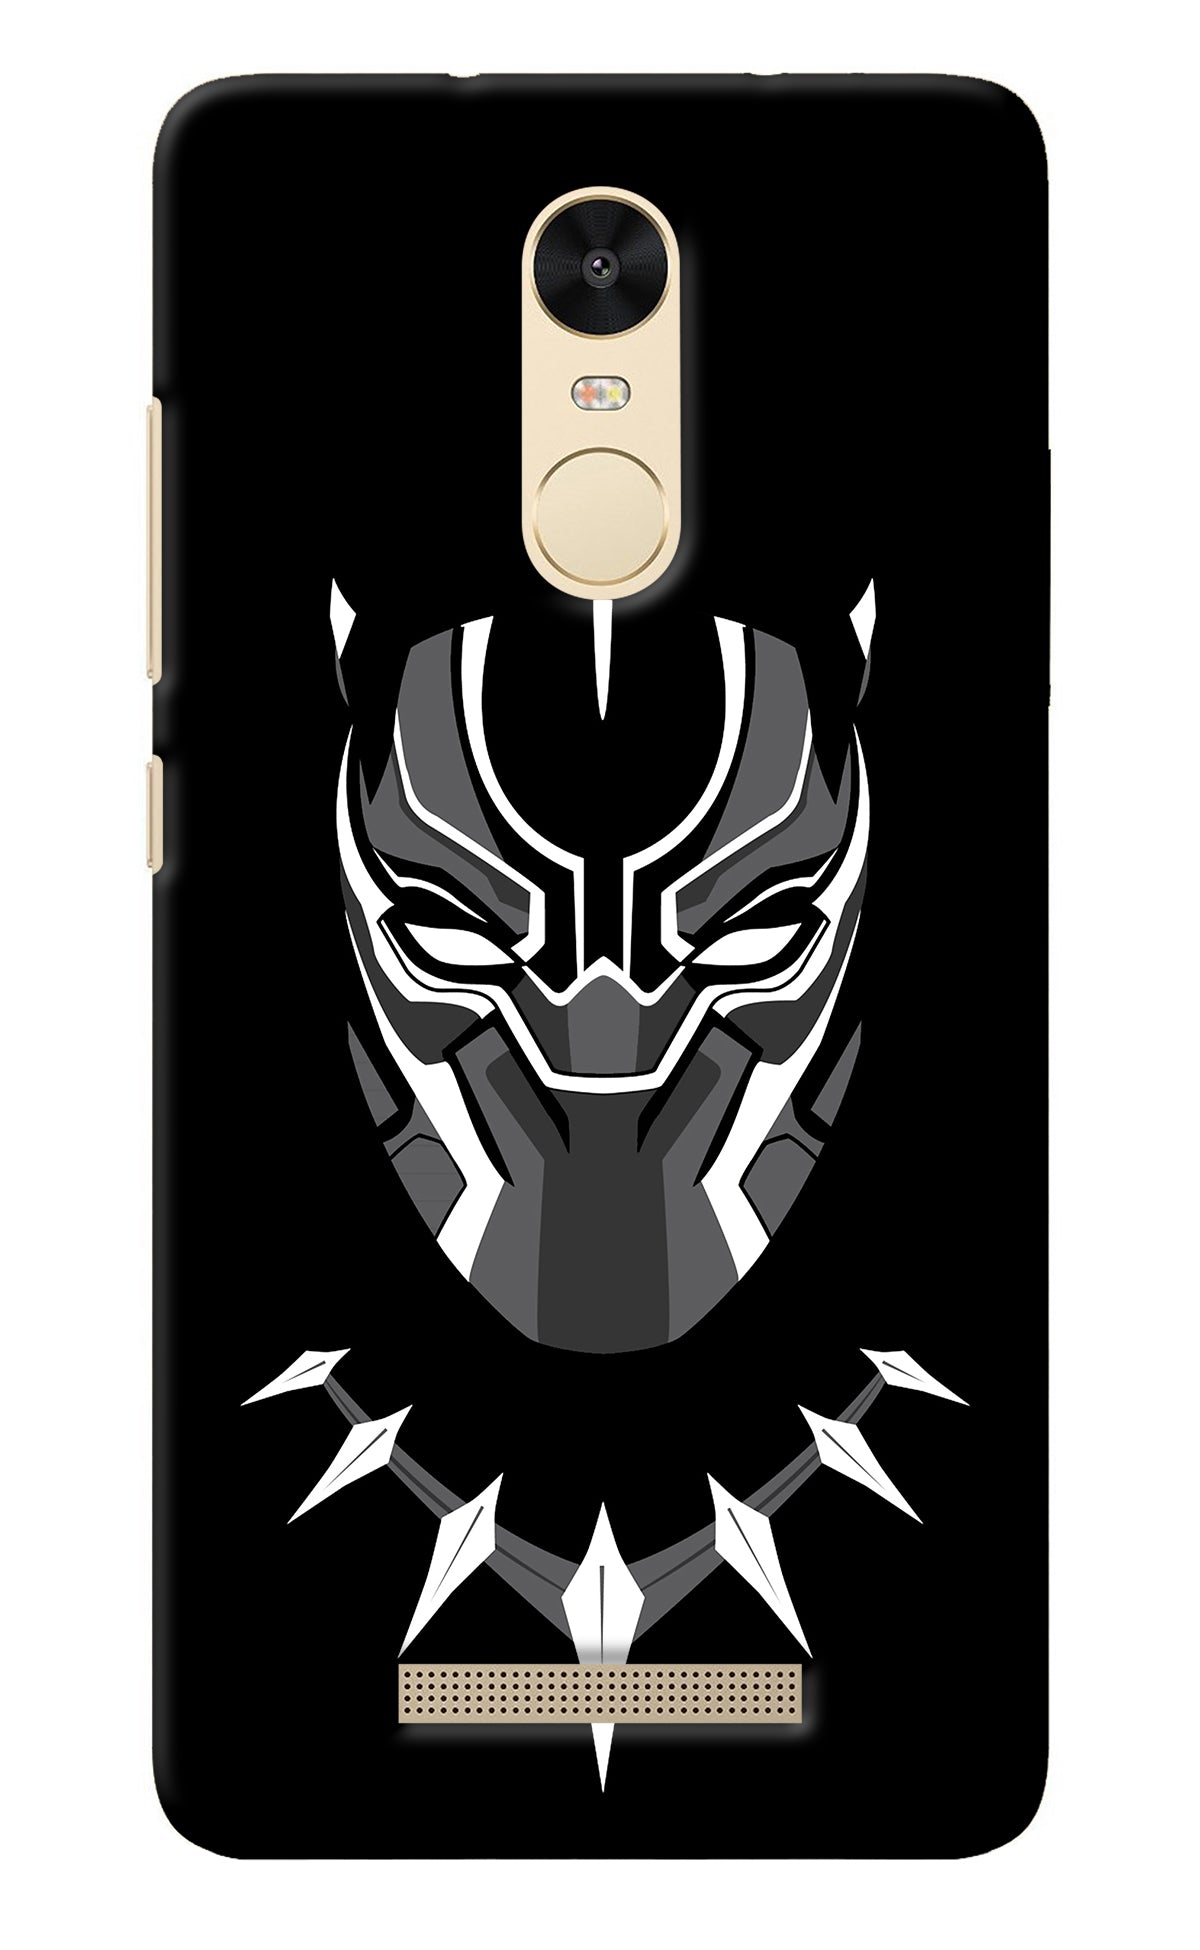 Black Panther Redmi Note 3 Back Cover